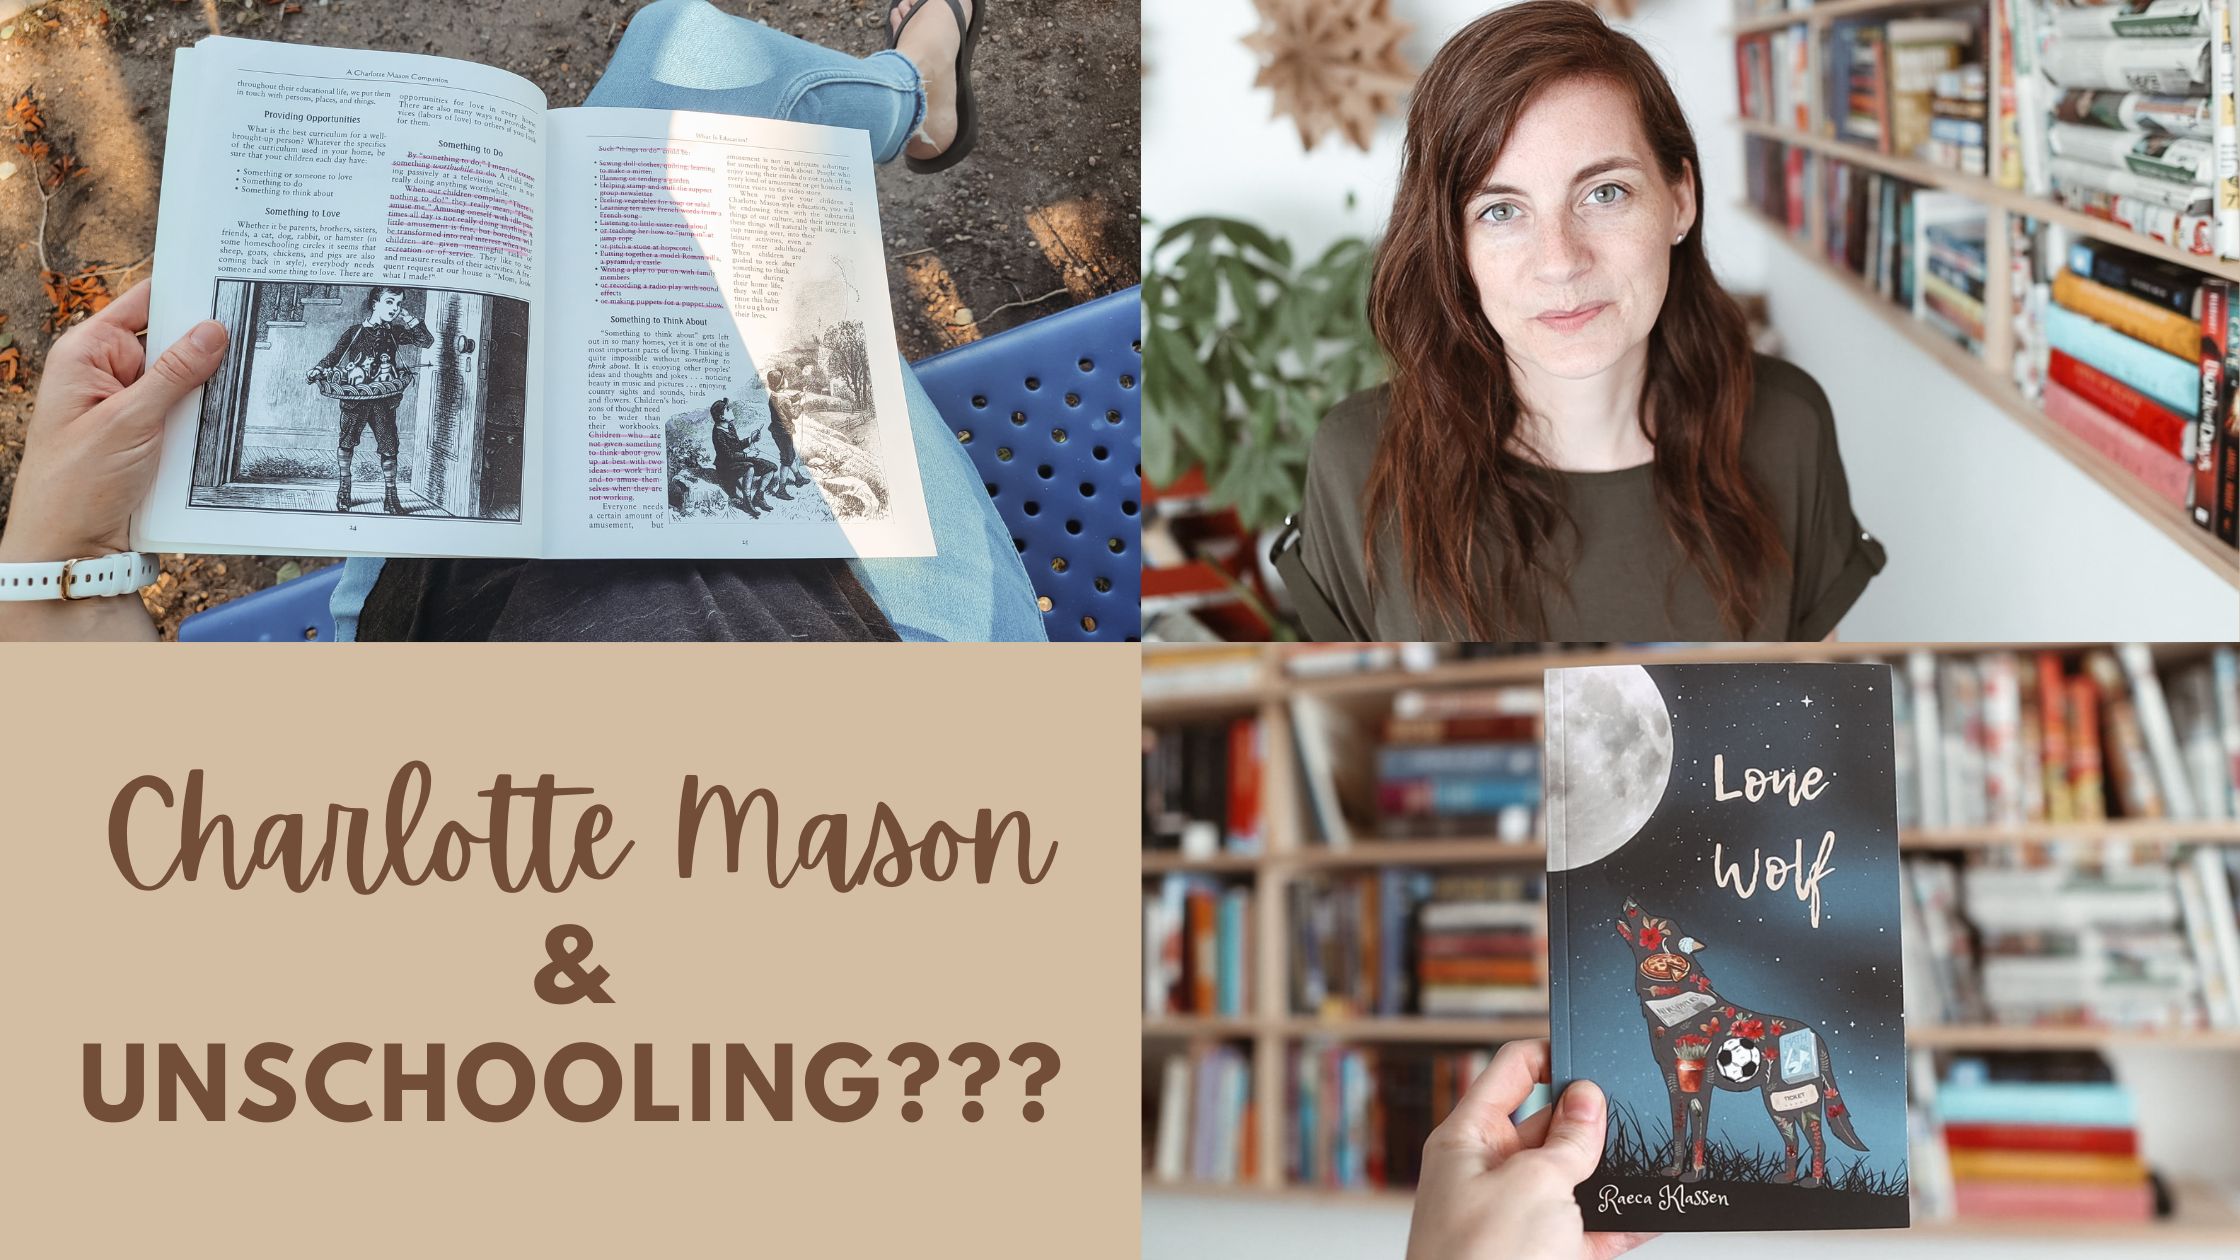 Merging the Charlotte Mason philosophy and Unschooling